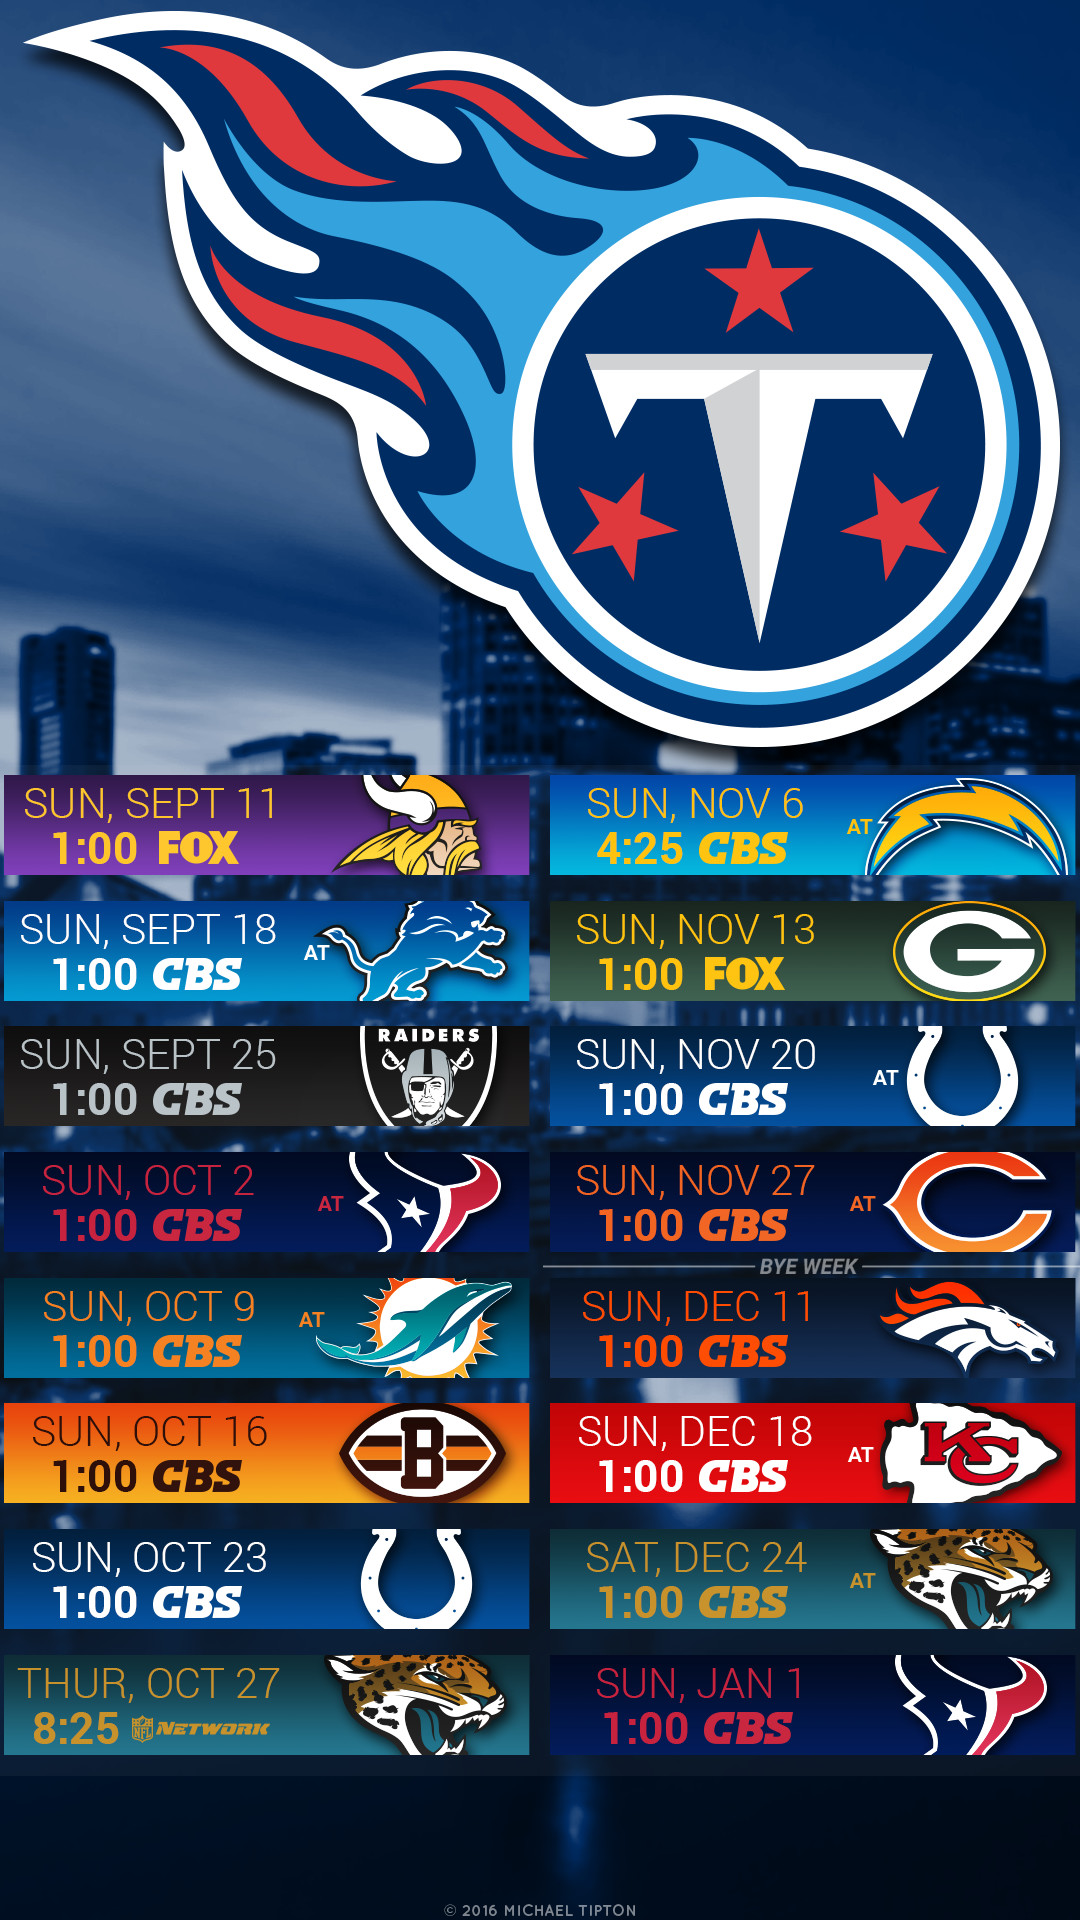 1080x1920 tennessee titans 2016 schedule logo wallpaper iphone 5, 6, 7, galaxy s6, ...